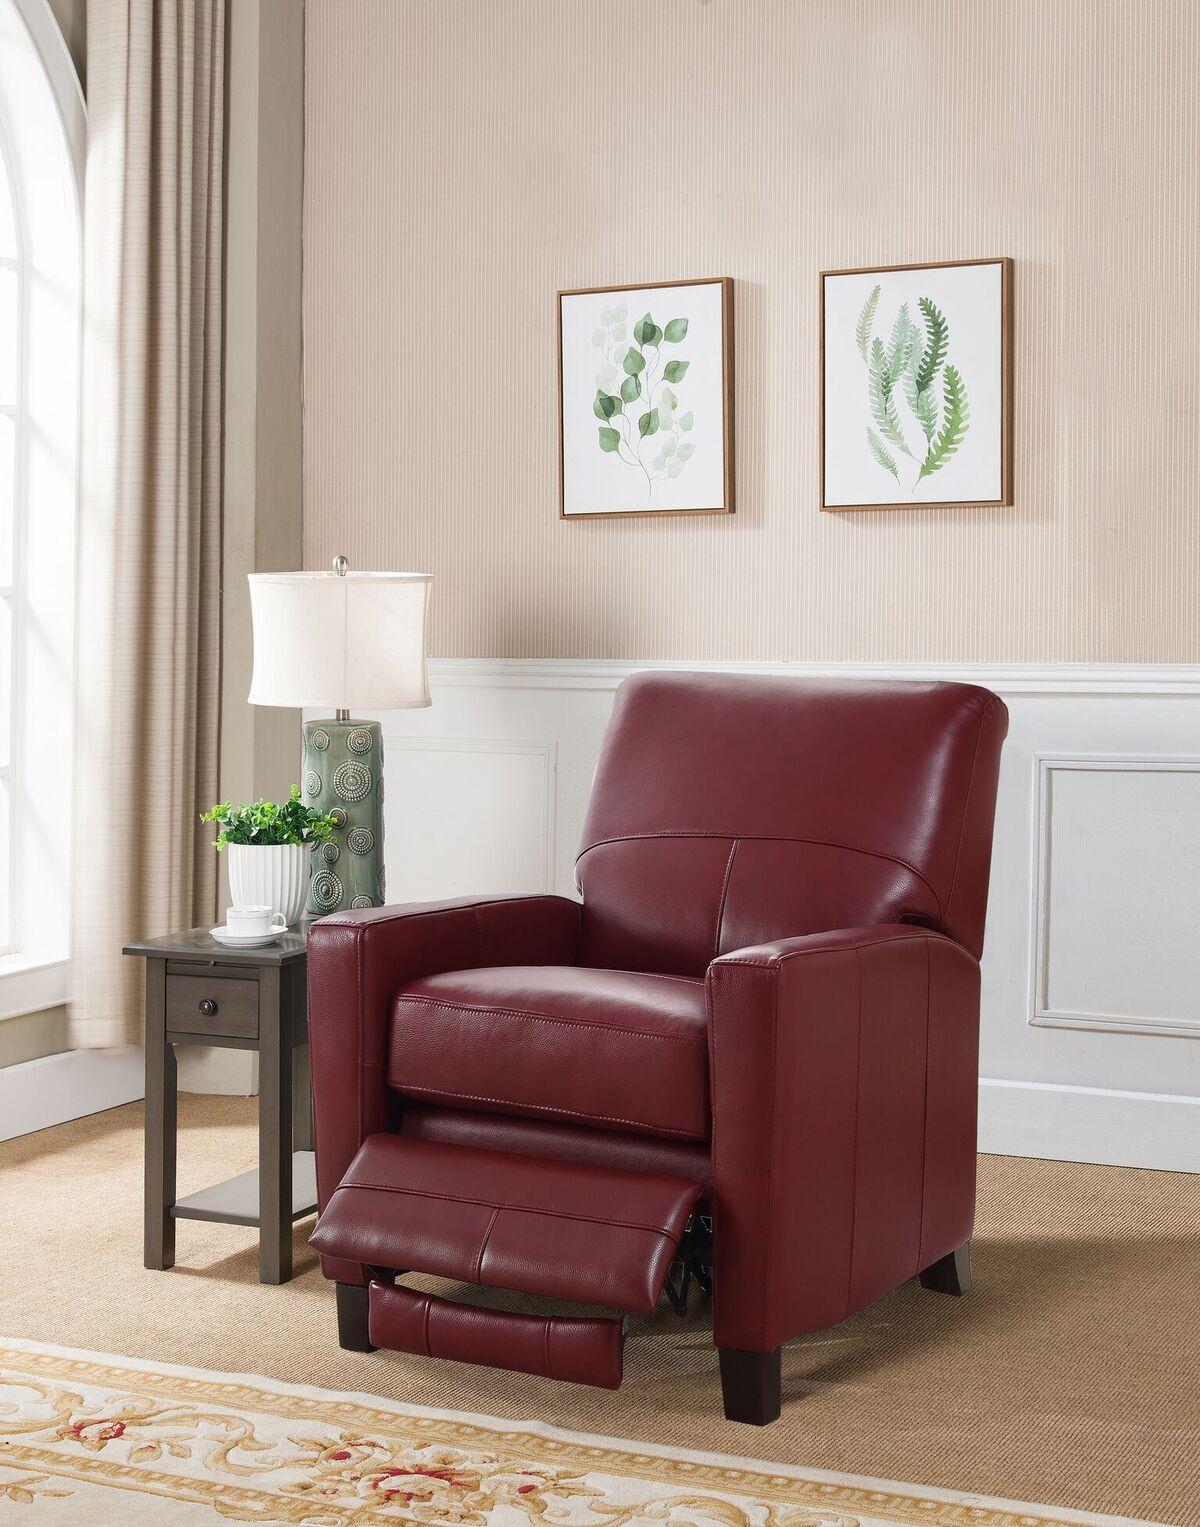 Contemporary, Modern Recliner Chair Hydeline Conway Conway-RED in Red Top grain leather